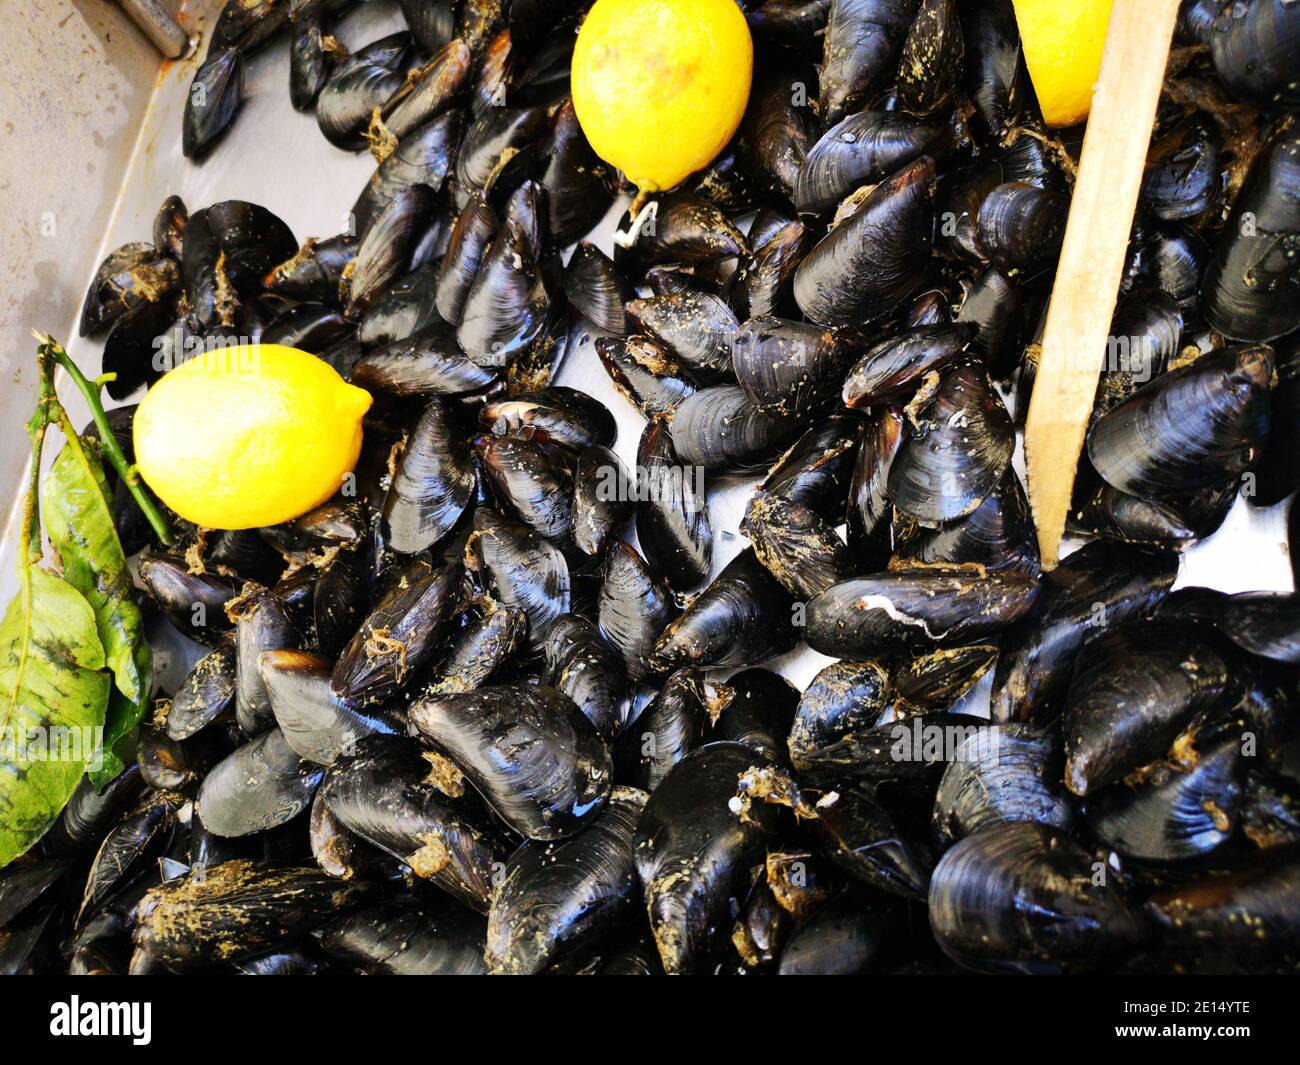 Mussels with lemon in open seamarket, Napoli Stock Photo